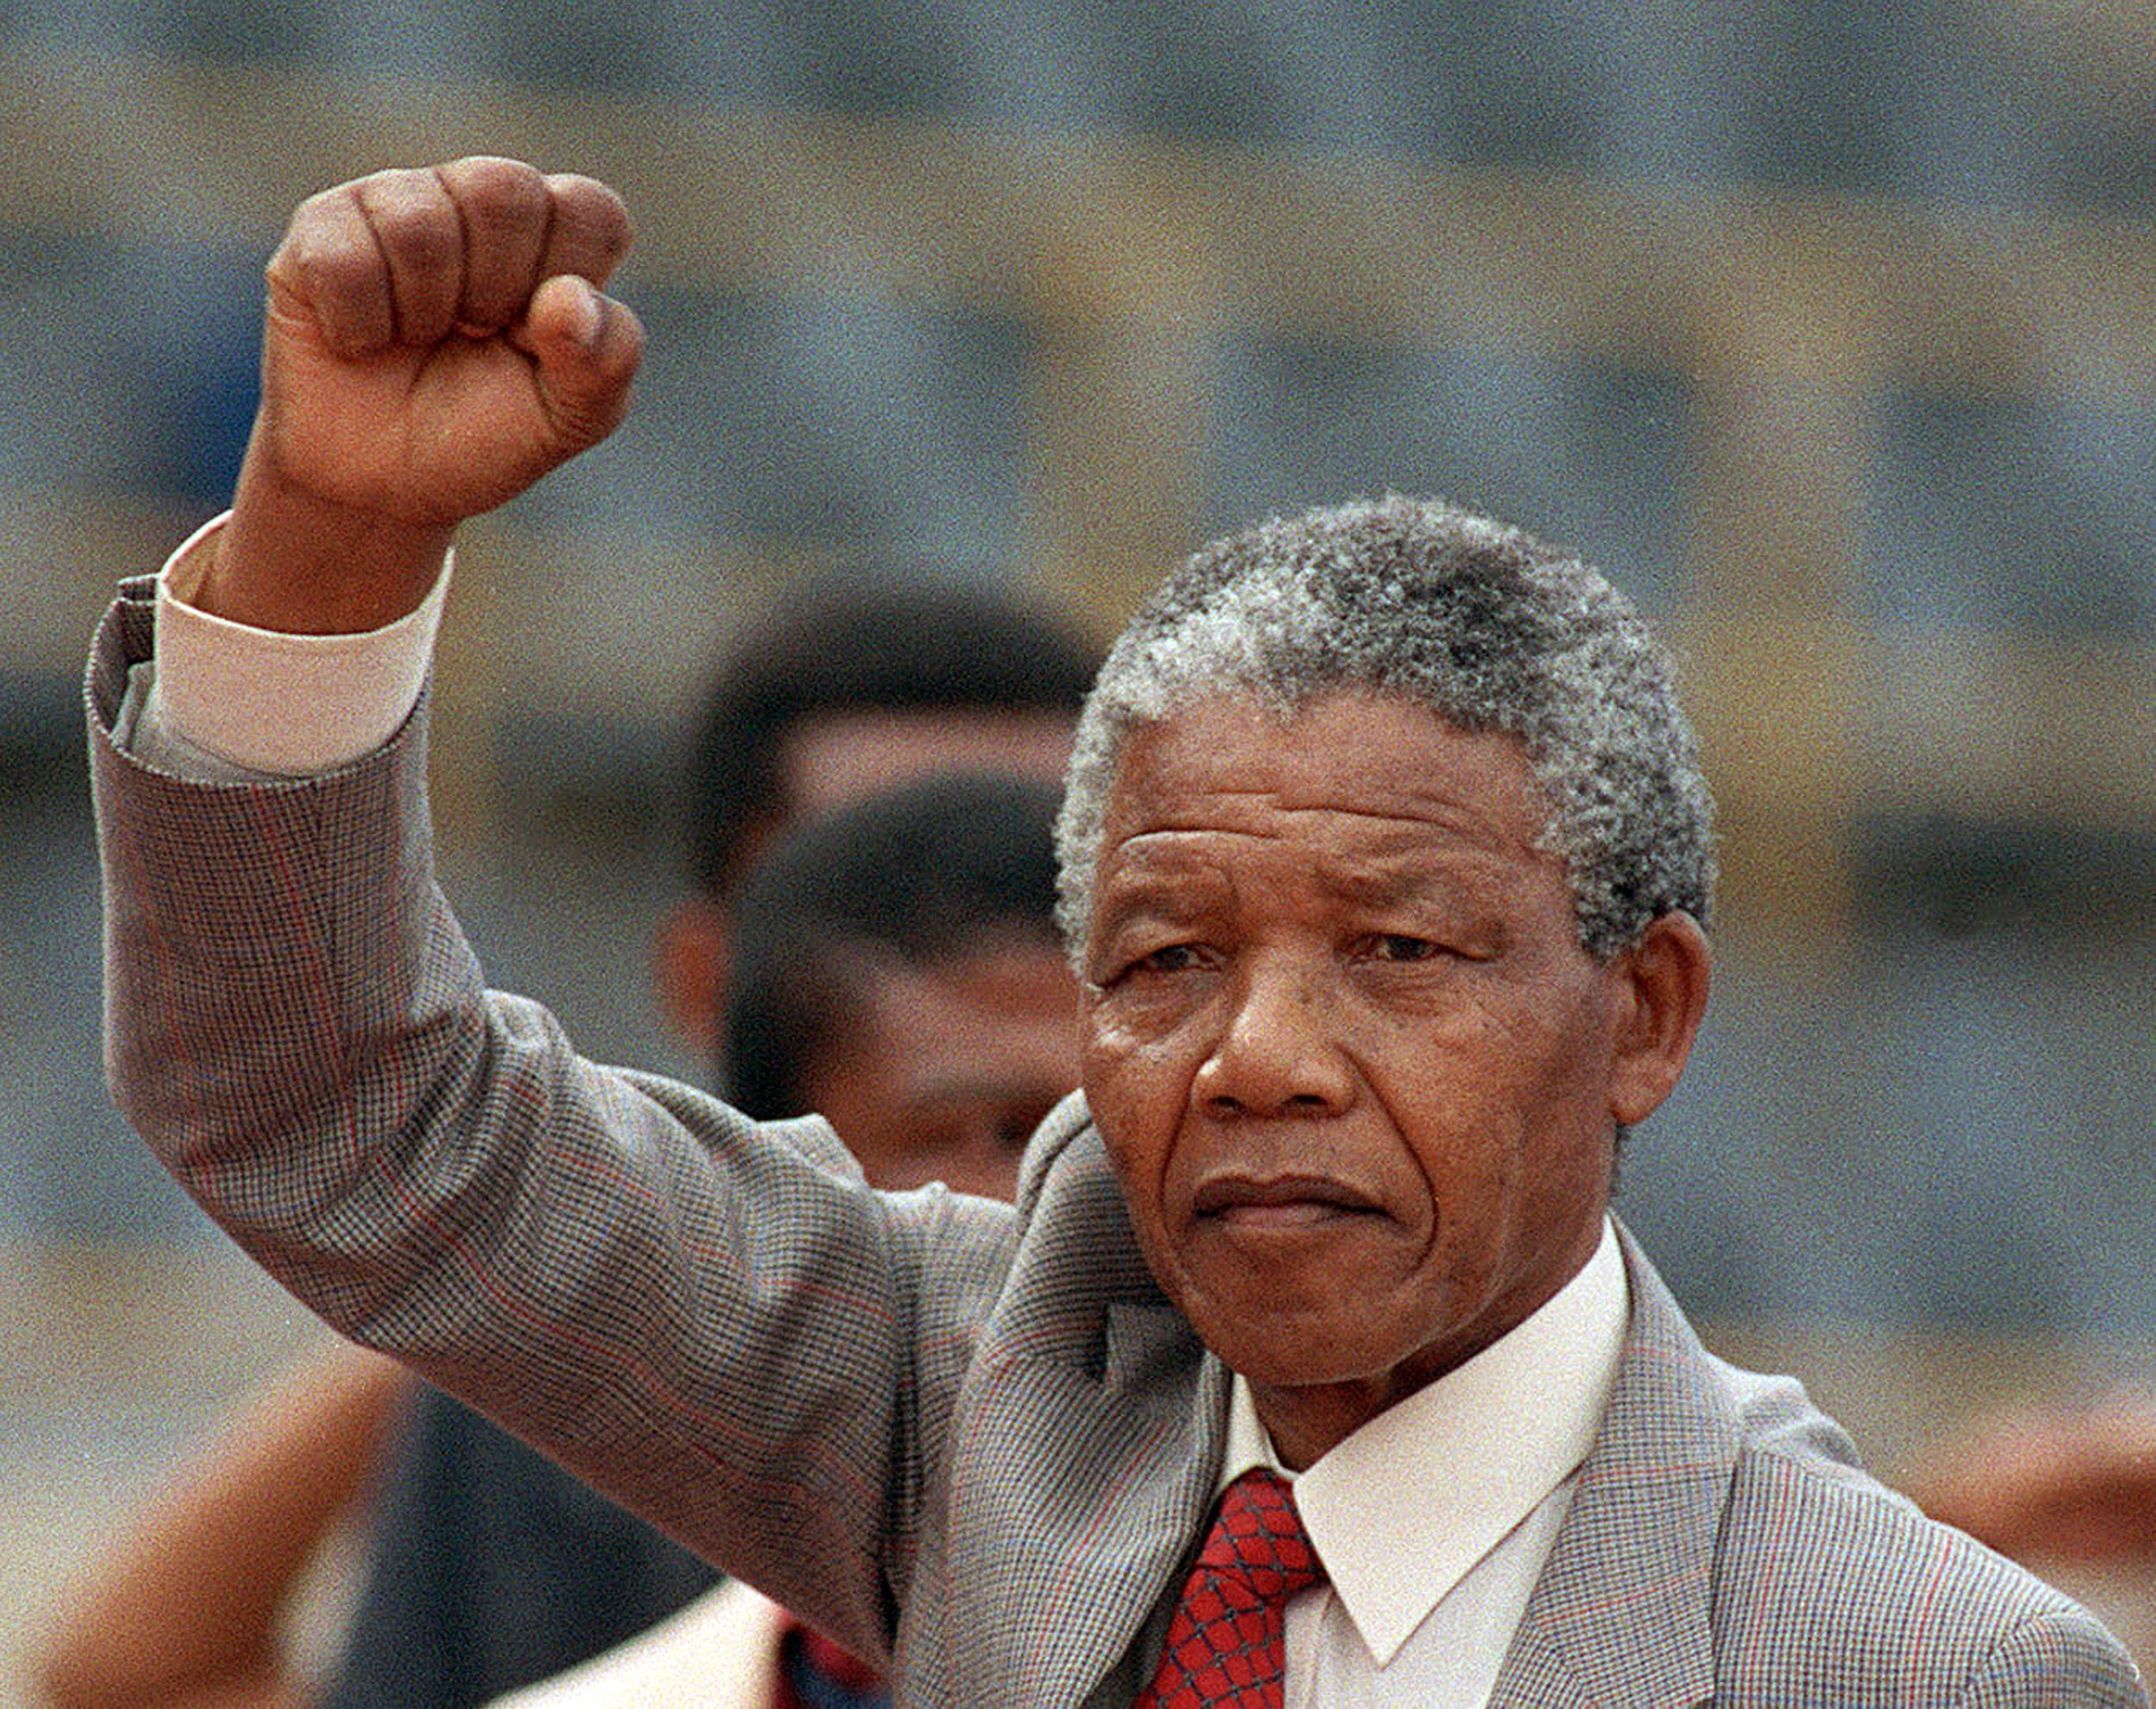 Anti-apartheid leader Nelson Mandela arriving to address a mass rally, a few days after his release from jail, on Feb. 25 1990,  in Bloemfontein, South Africa. (Trevor Samson—AFP via Getty Images)